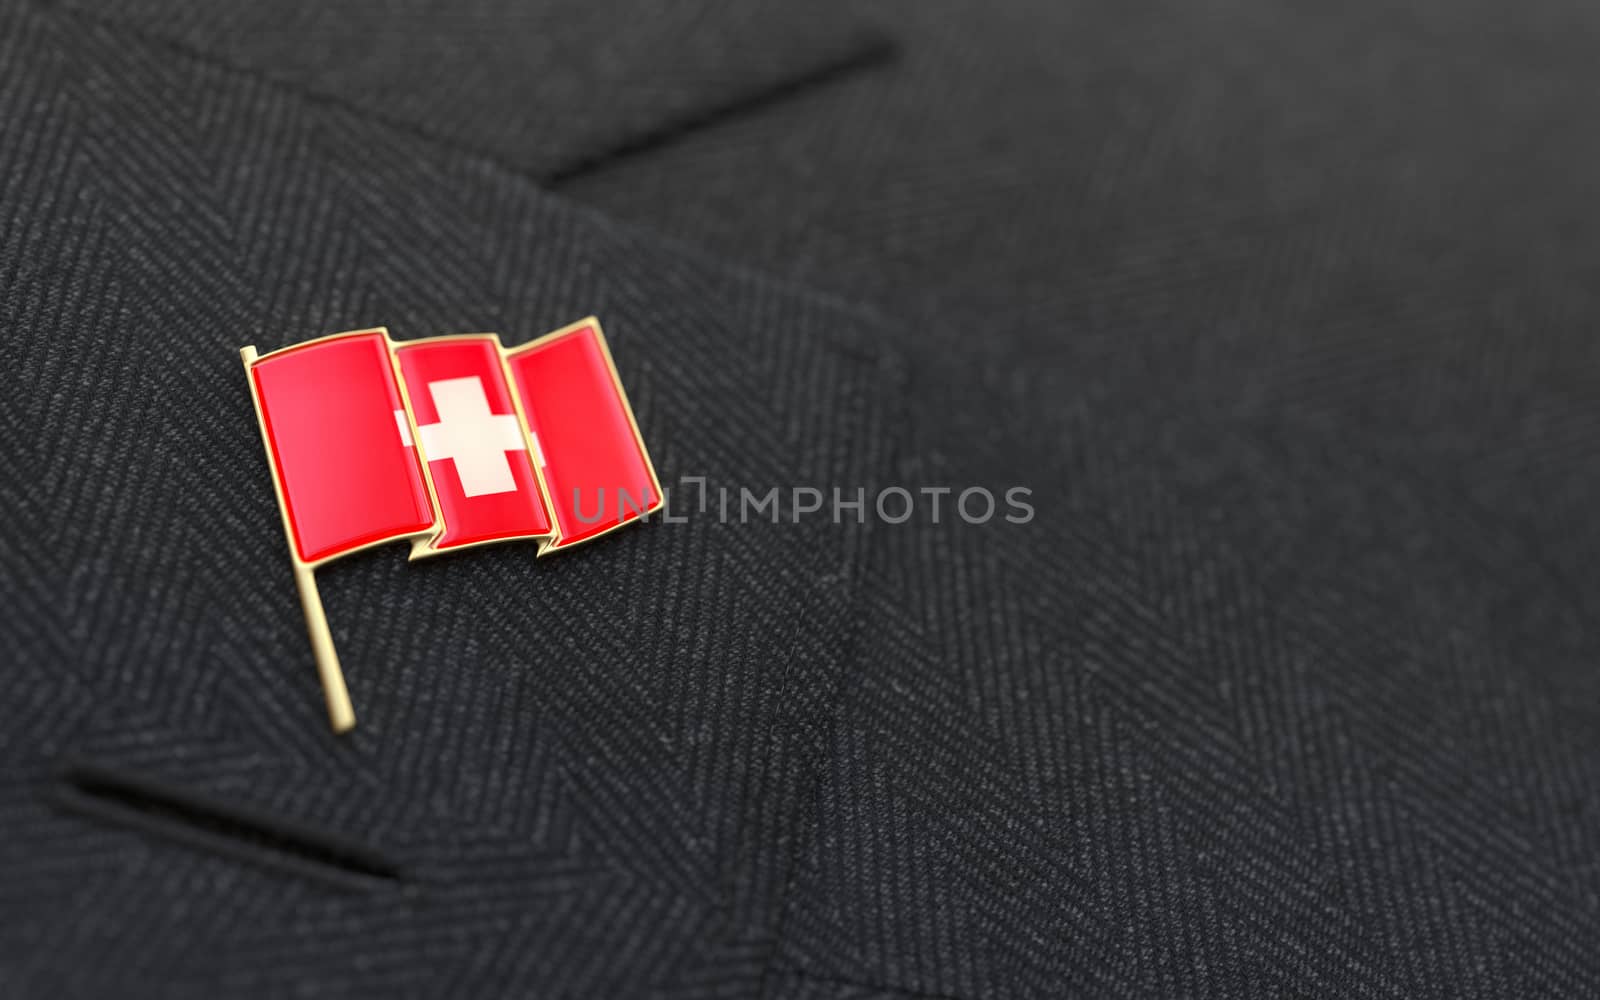 Switzerland flag lapel pin on the collar of a business suit jacket shows patriotism